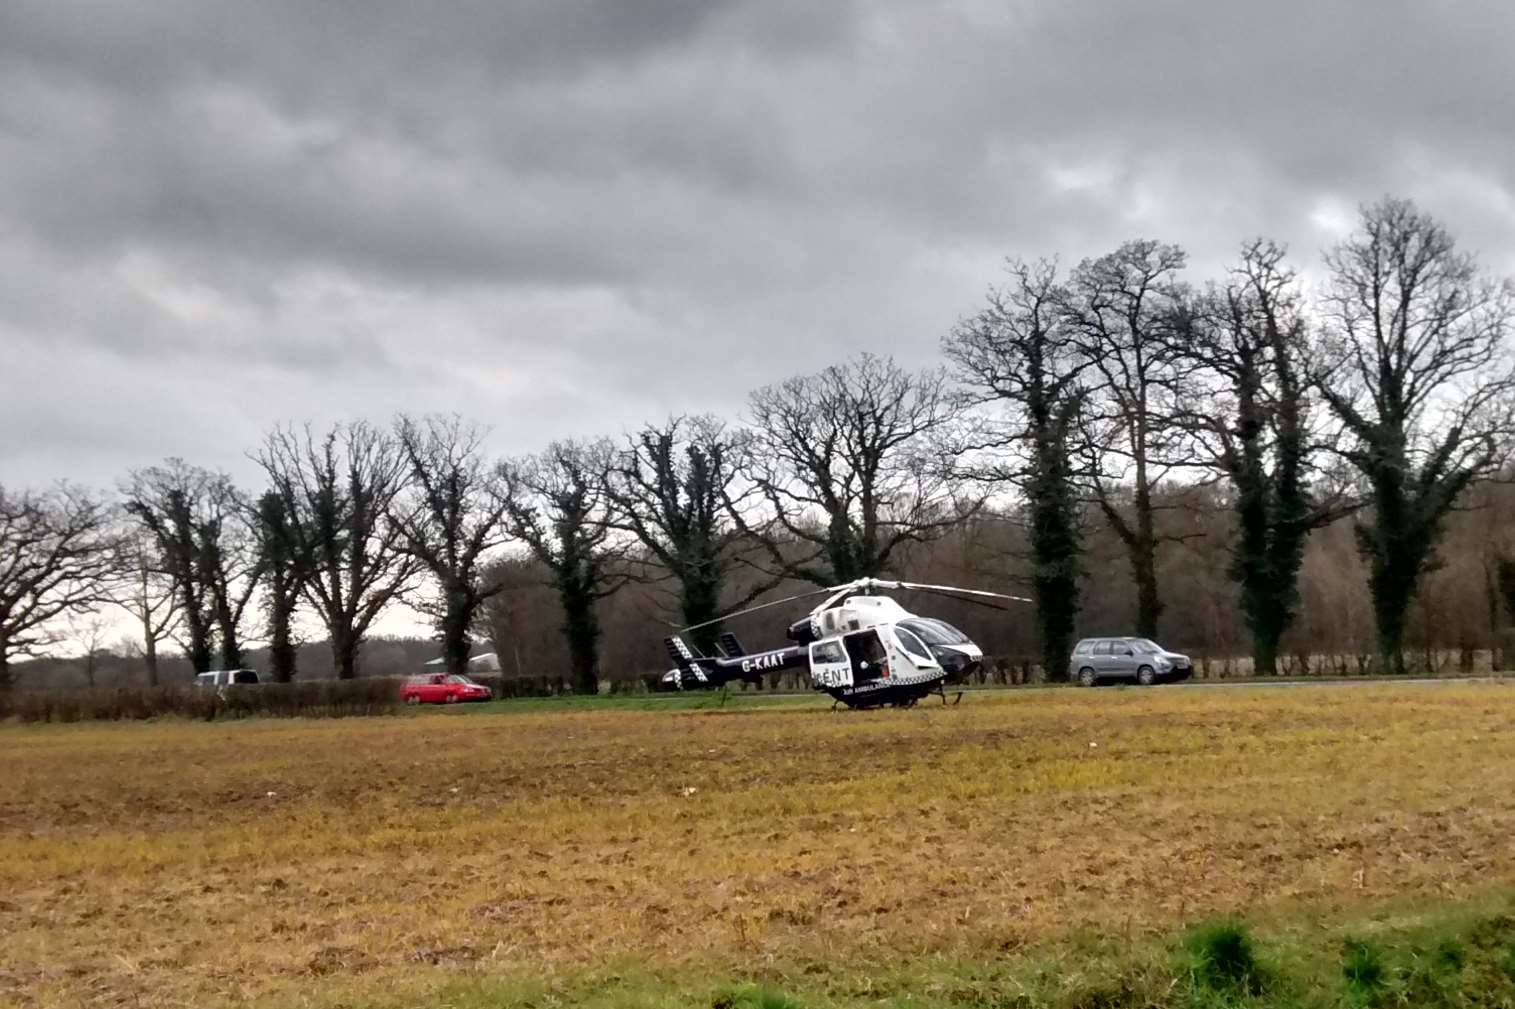 The air ambulance landed near the junction of Smarden Bell Road and Green Hill Lane